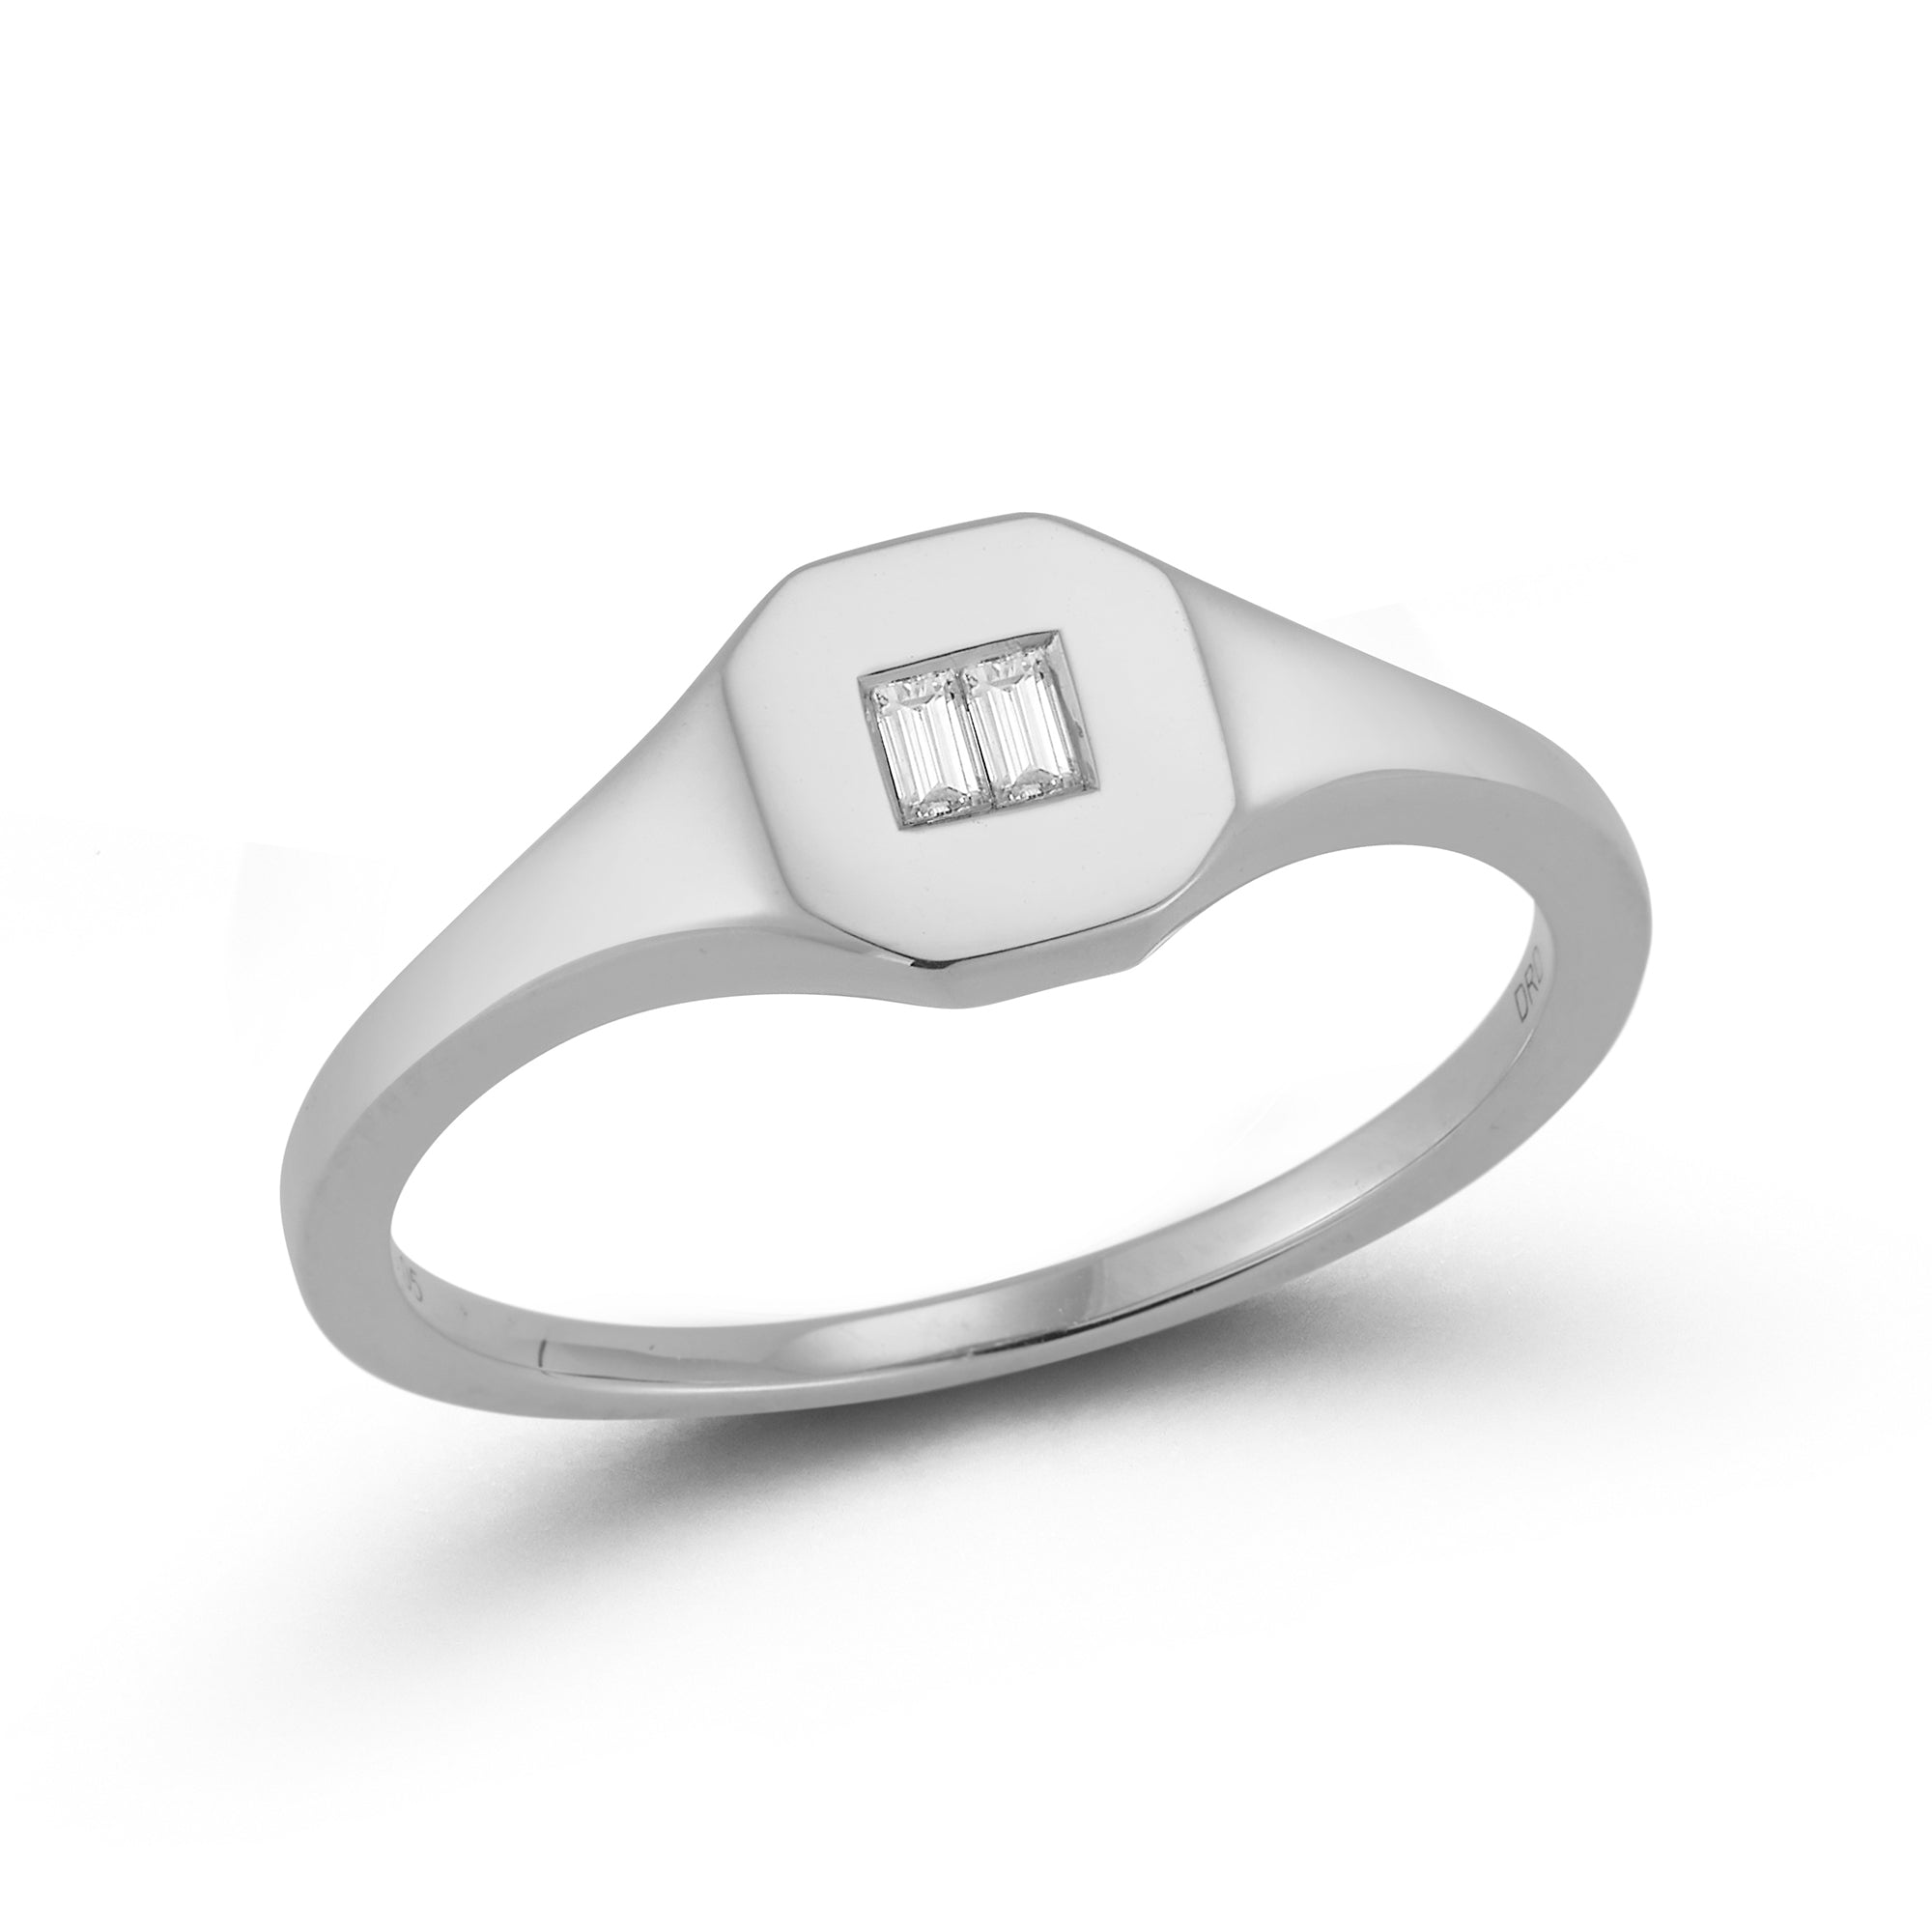 White Gold-1^Diamond Signet Rings: Sadie Pearl Double Baguette Signet Ring in White Gold